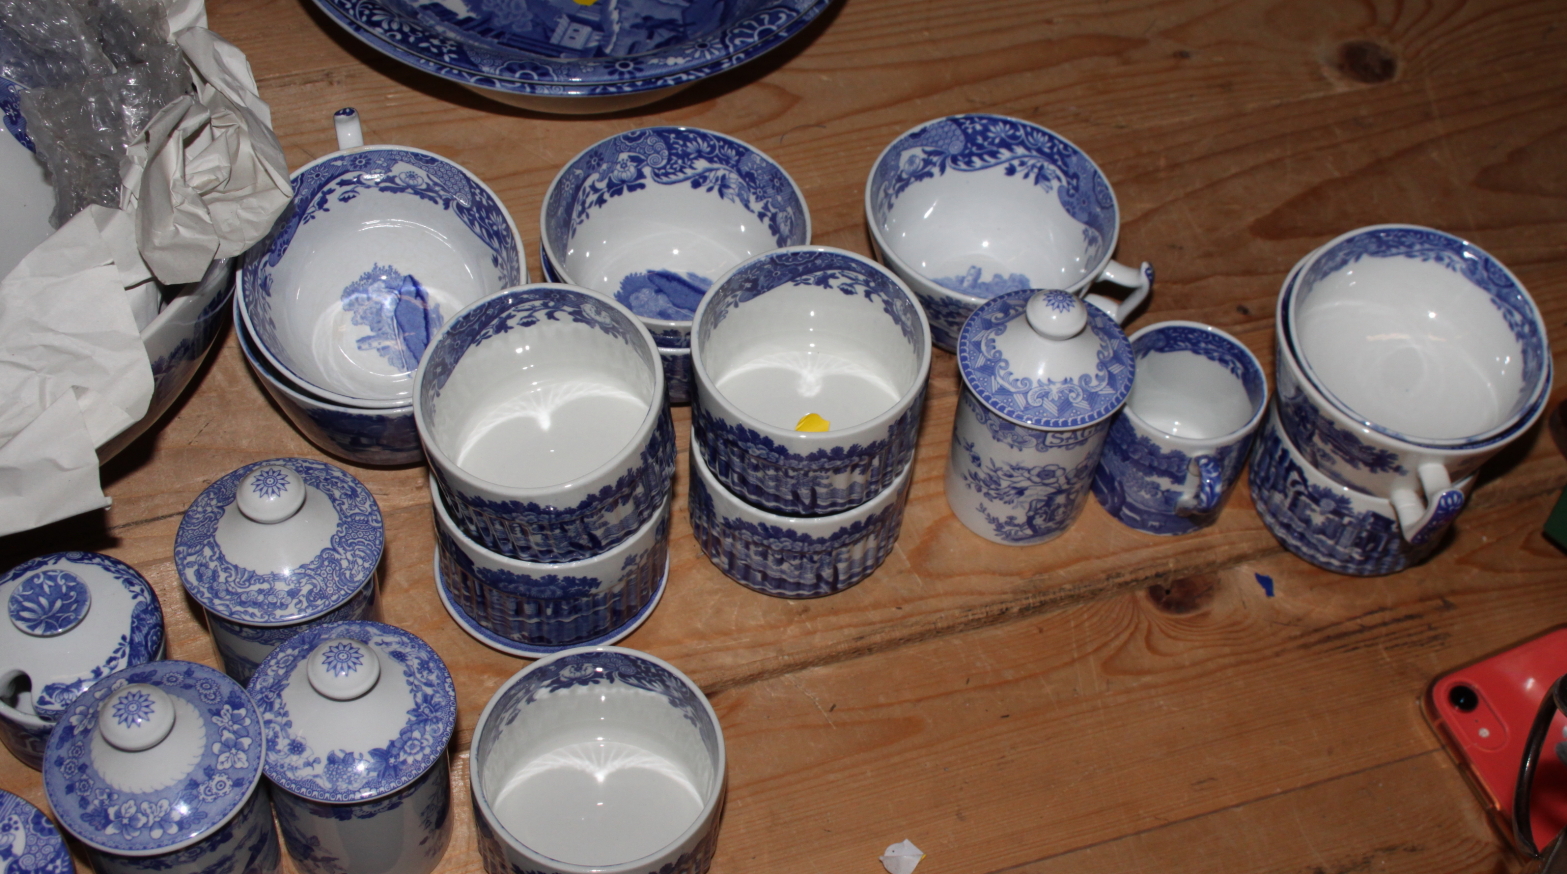 A Copeland Spode "Italian" pattern combination service, including bowls, teapots, teacups, a - Image 11 of 47